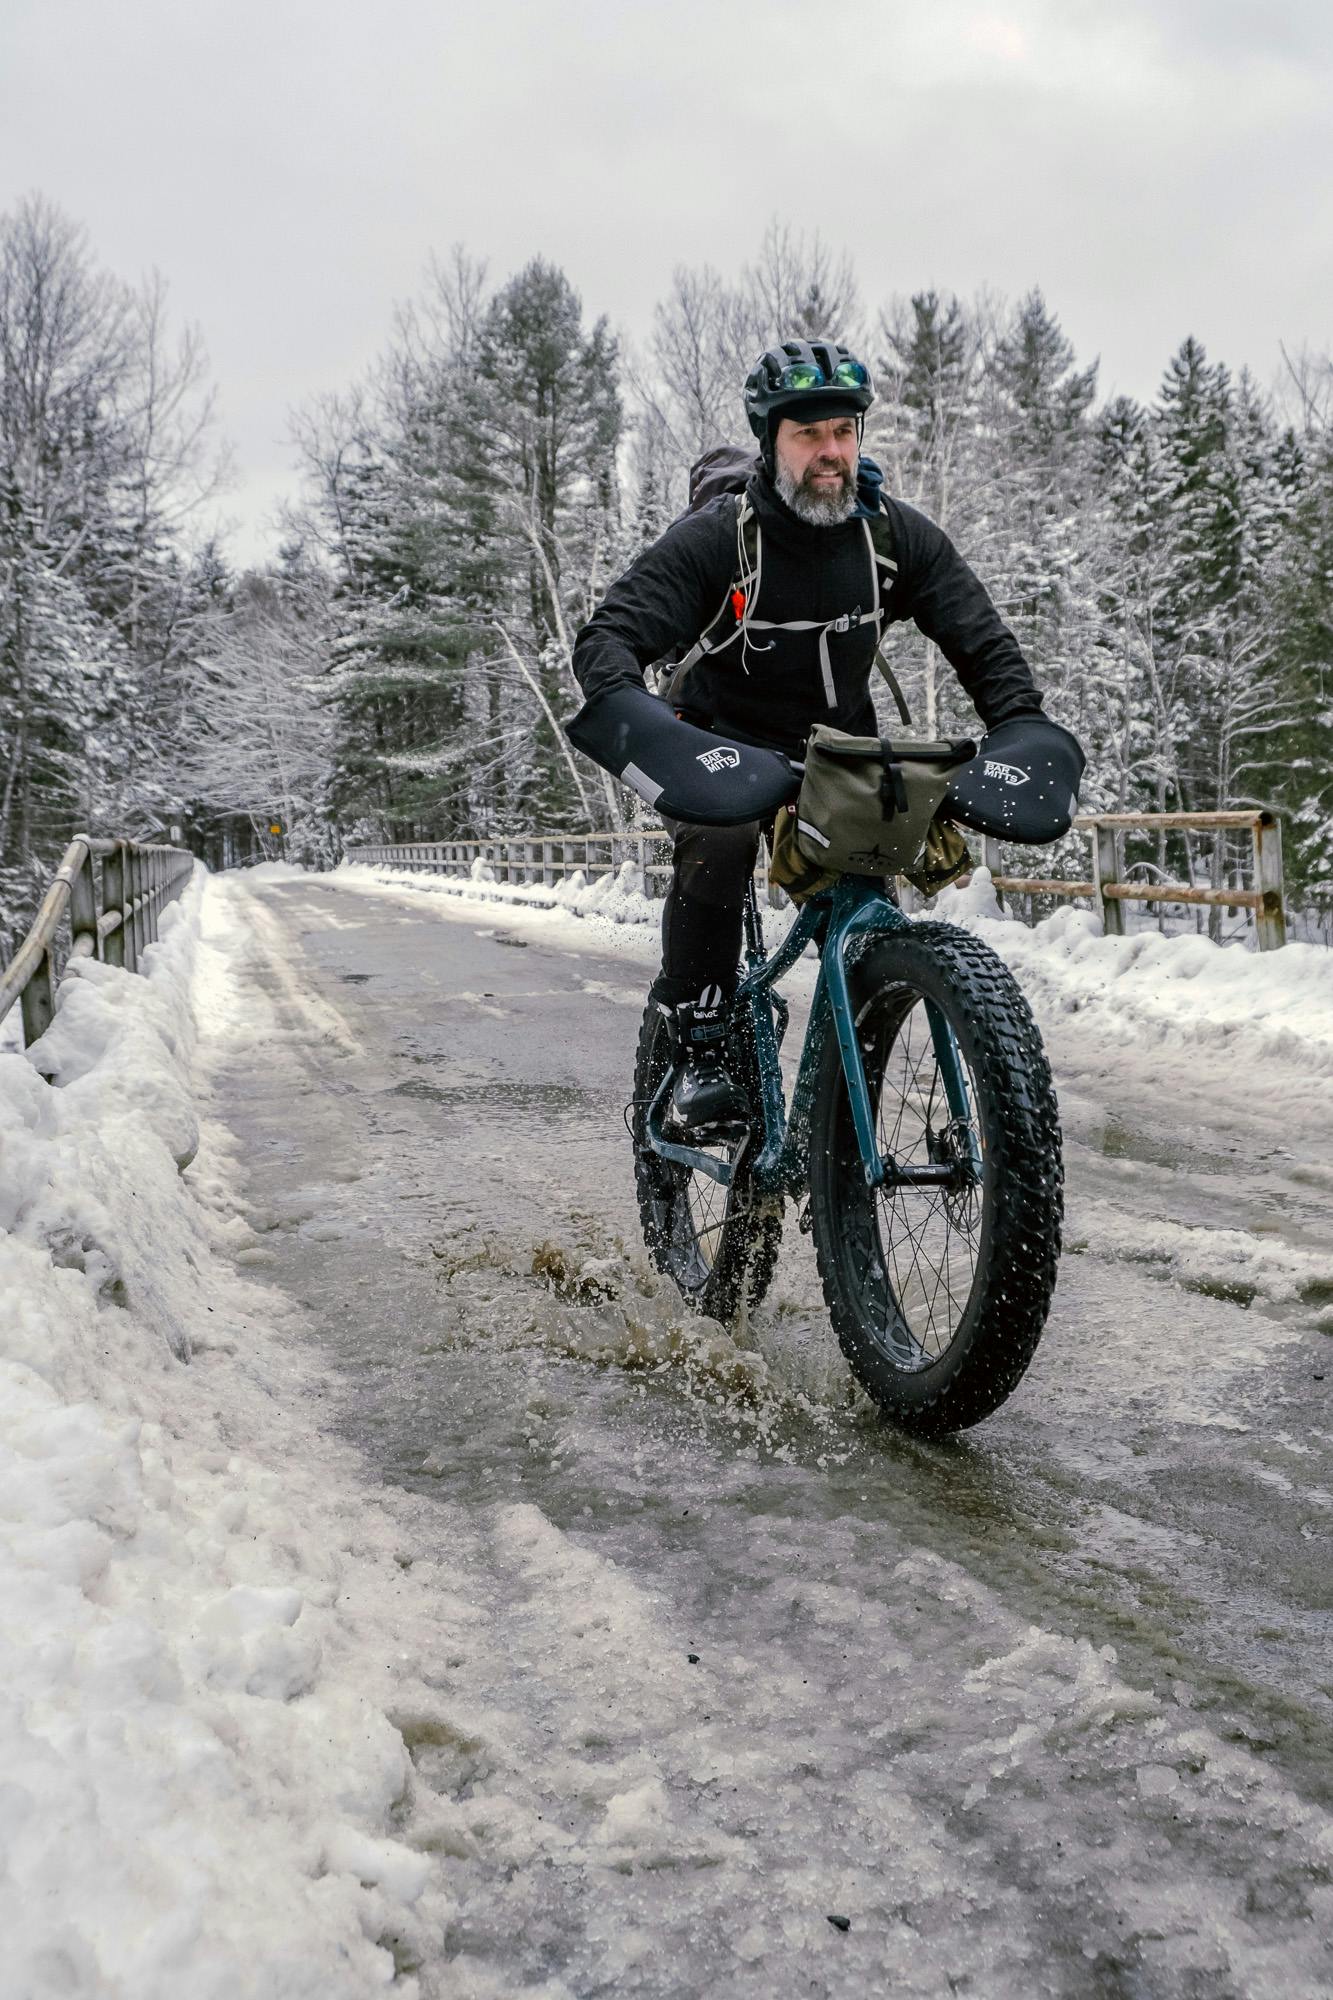 He rides in the slush and the snow. Nothing can stop him.